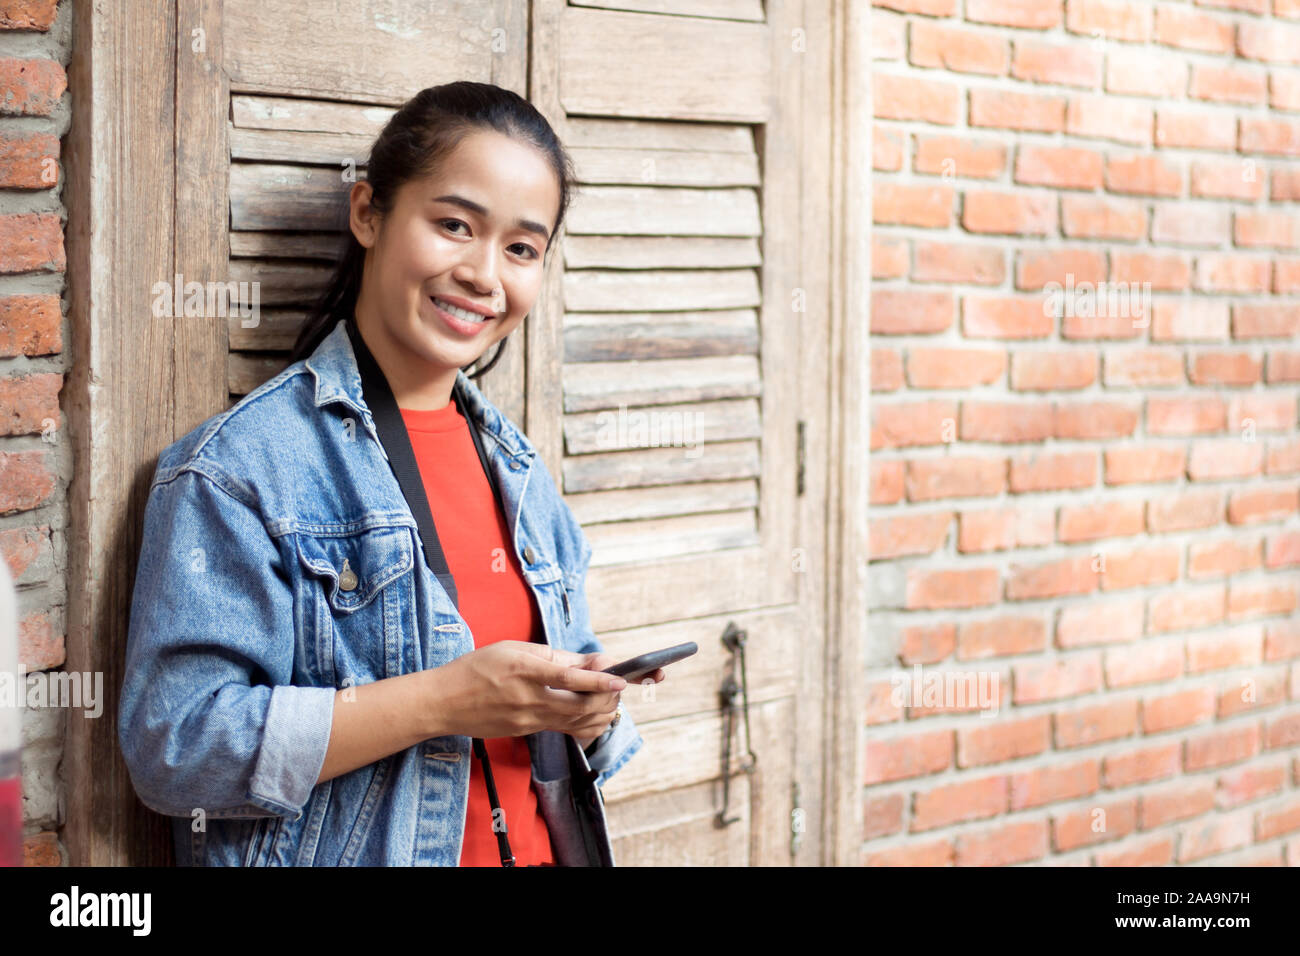 Teenage girl wearing a jacket, jeans and orange shirt standing against a wall and holding the phone with a smile. Stock Photo